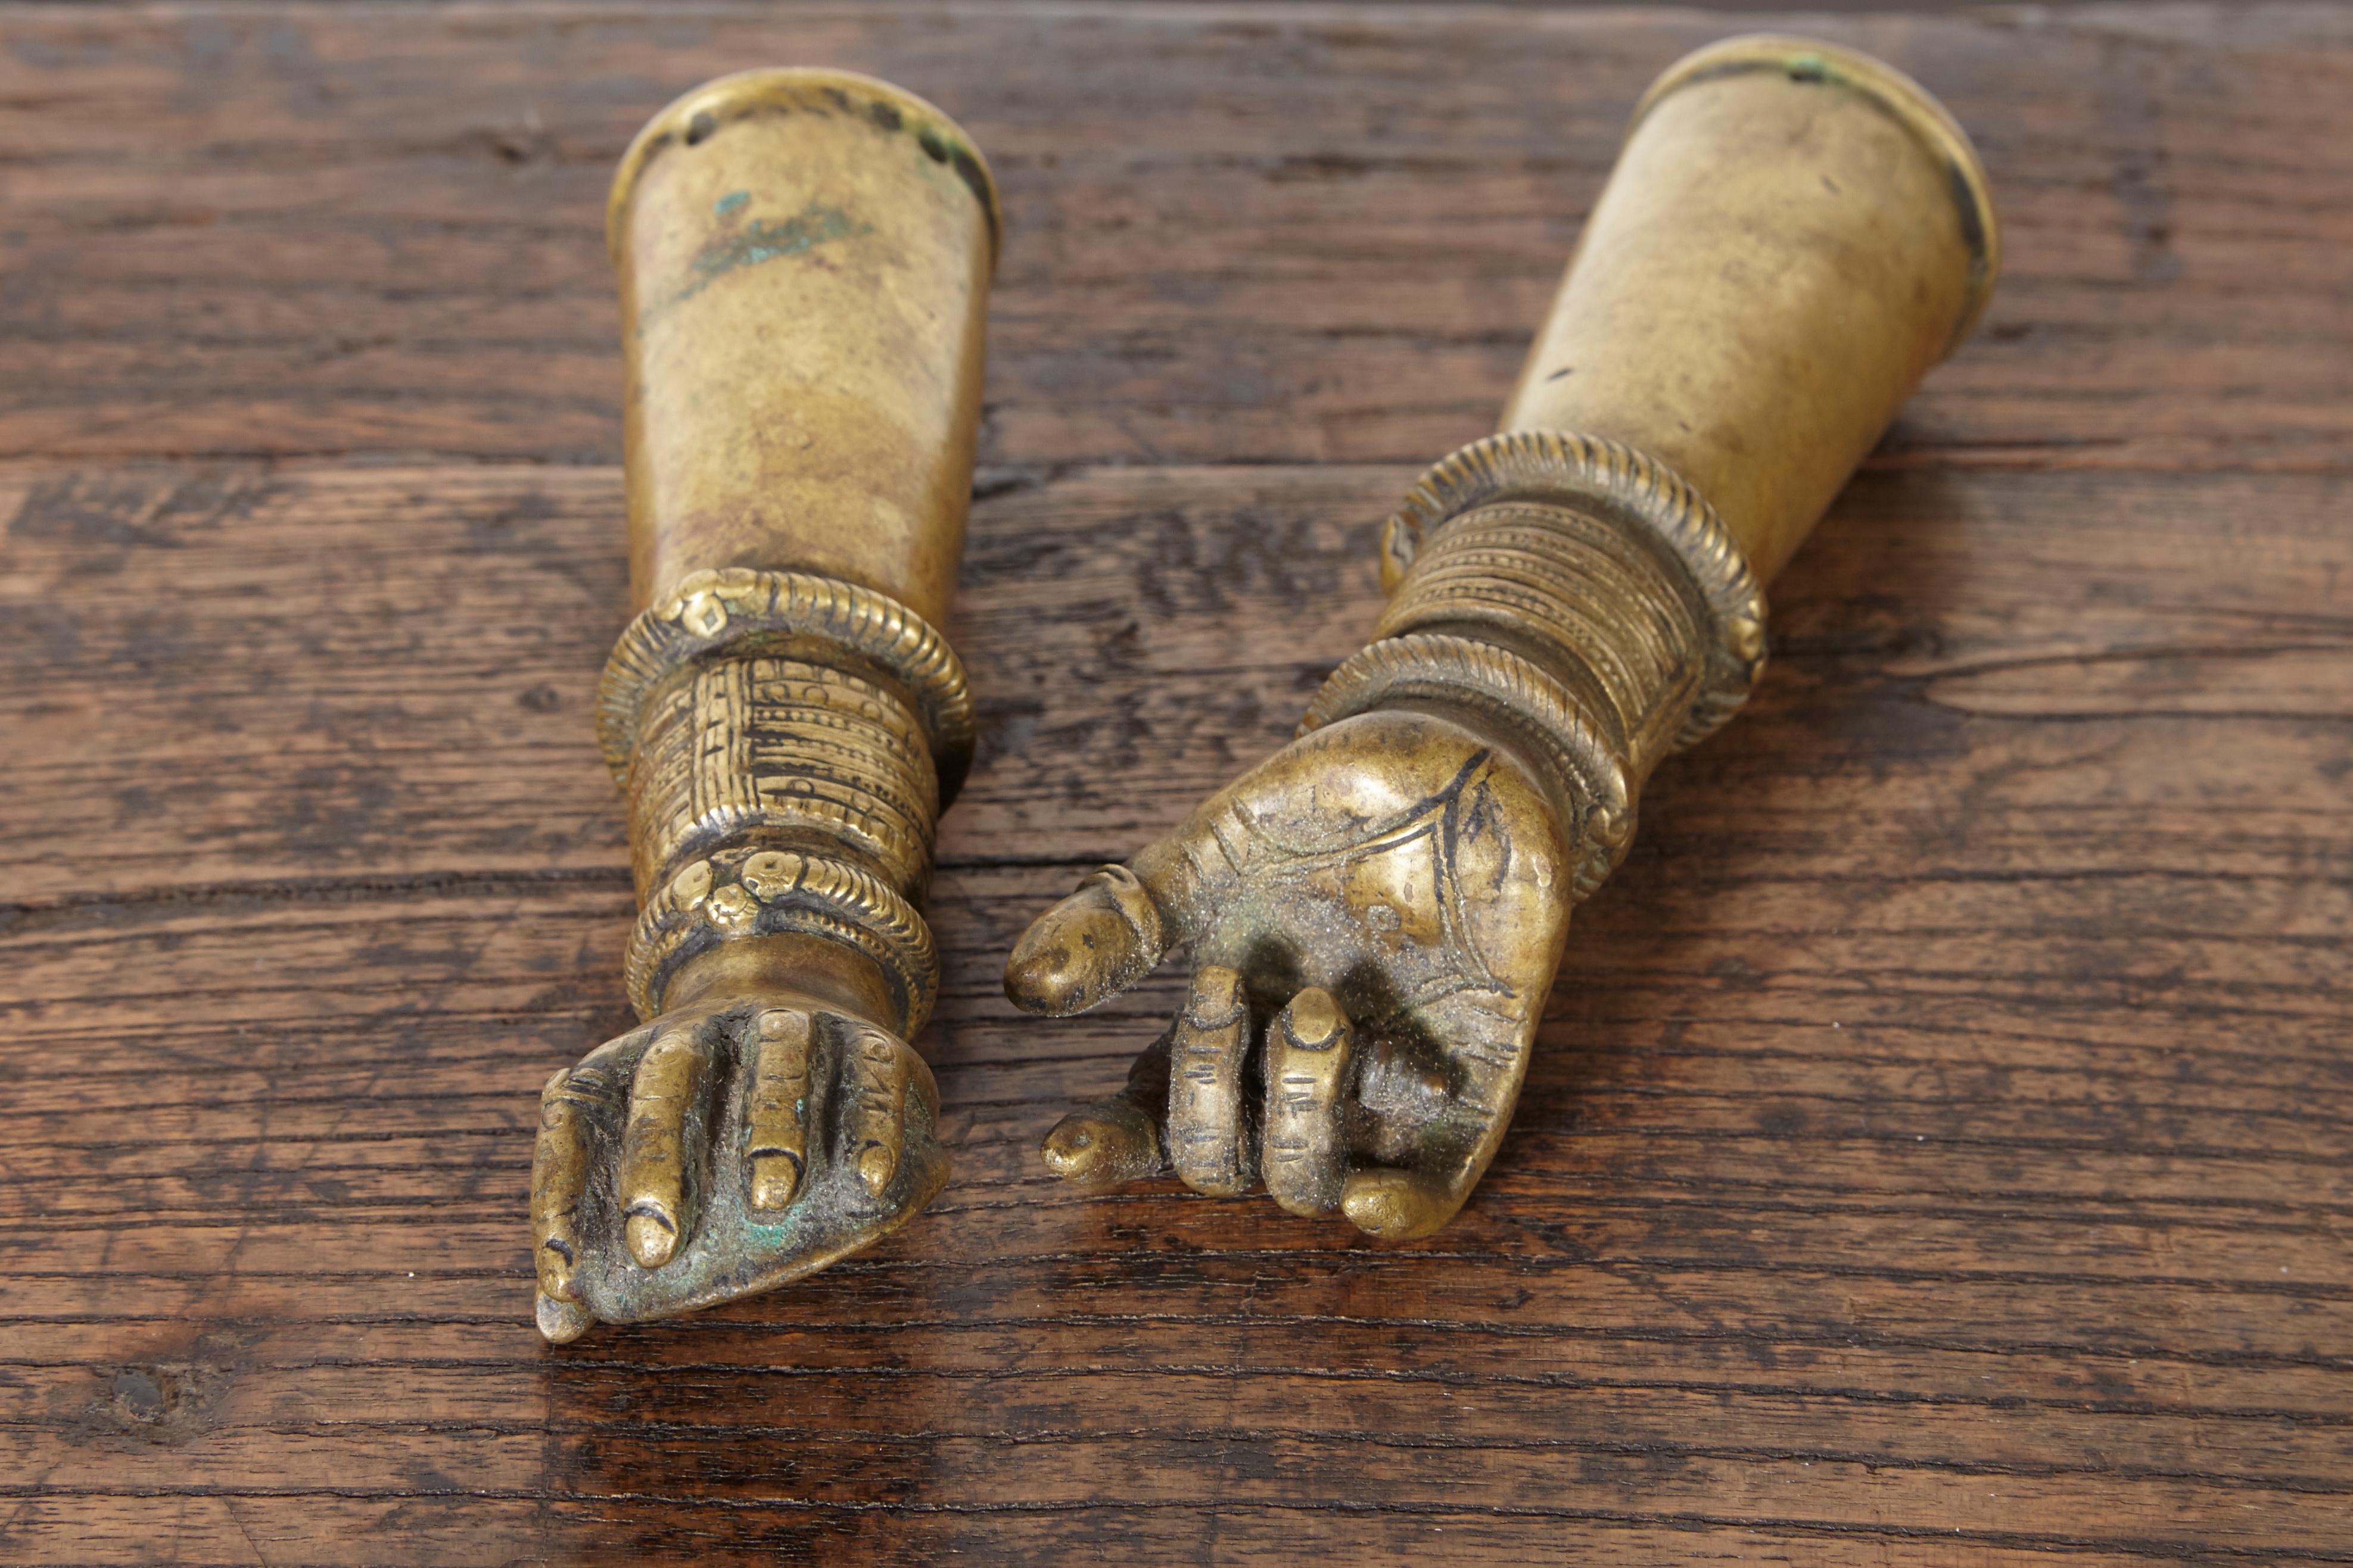 Indian Antique Bronze Votive Hands from India